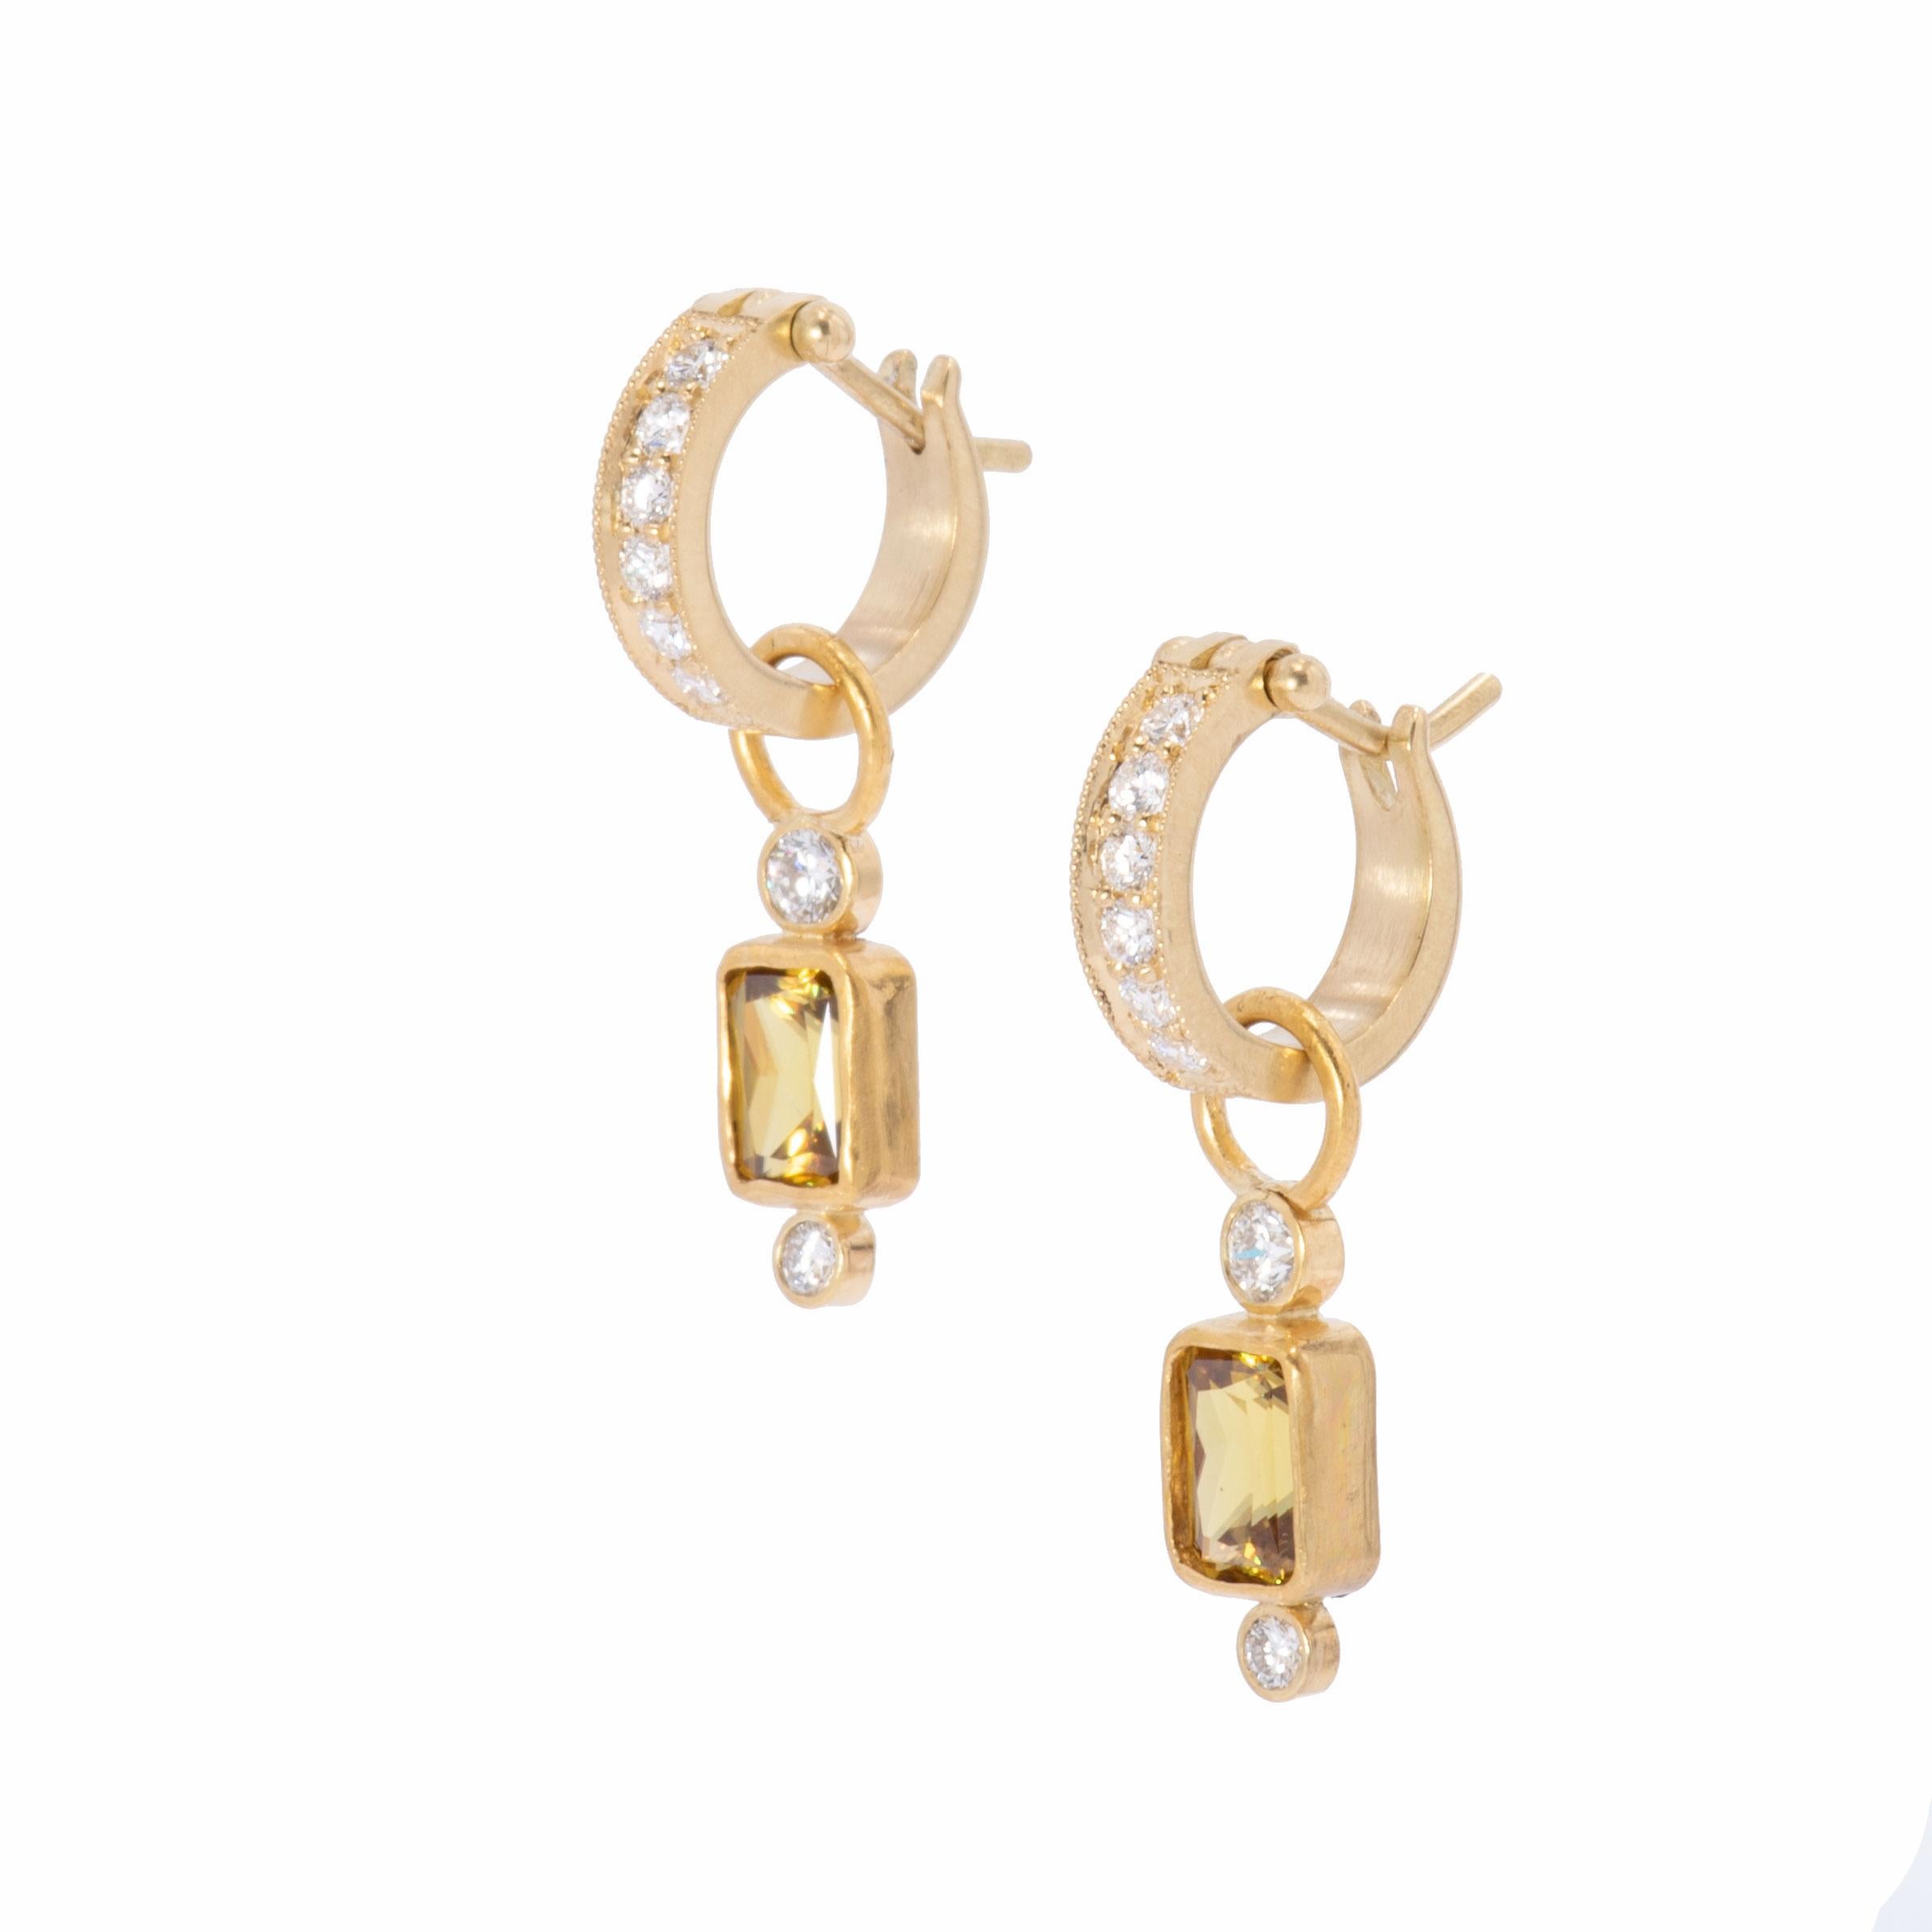 Sphene and Diamond Drop Earrings in 18k gold are handcrafted in our studio of natural sphene, an unusual stone and dazzling in this emerald cut. Honey gold lights flash from emerald cut sphene 2.5ctw. and are balanced with round white diamonds